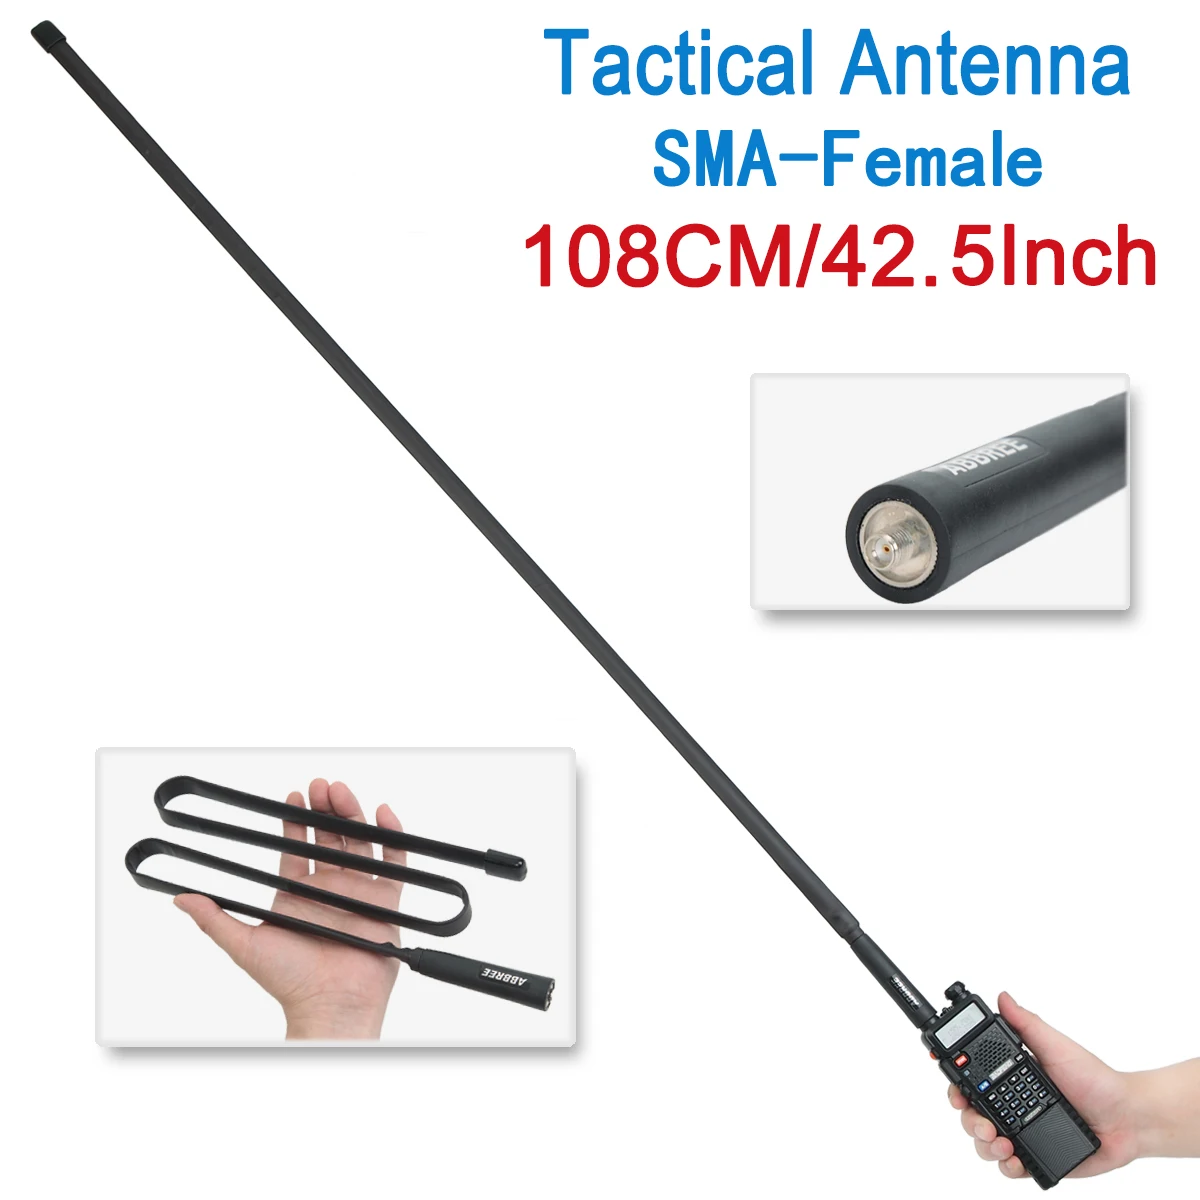 Dual Band VHF UHF 144/430Mhz Antenna for Two Way Radio 80cm Foldable Tactical Antenna with SMA-Female Connector 